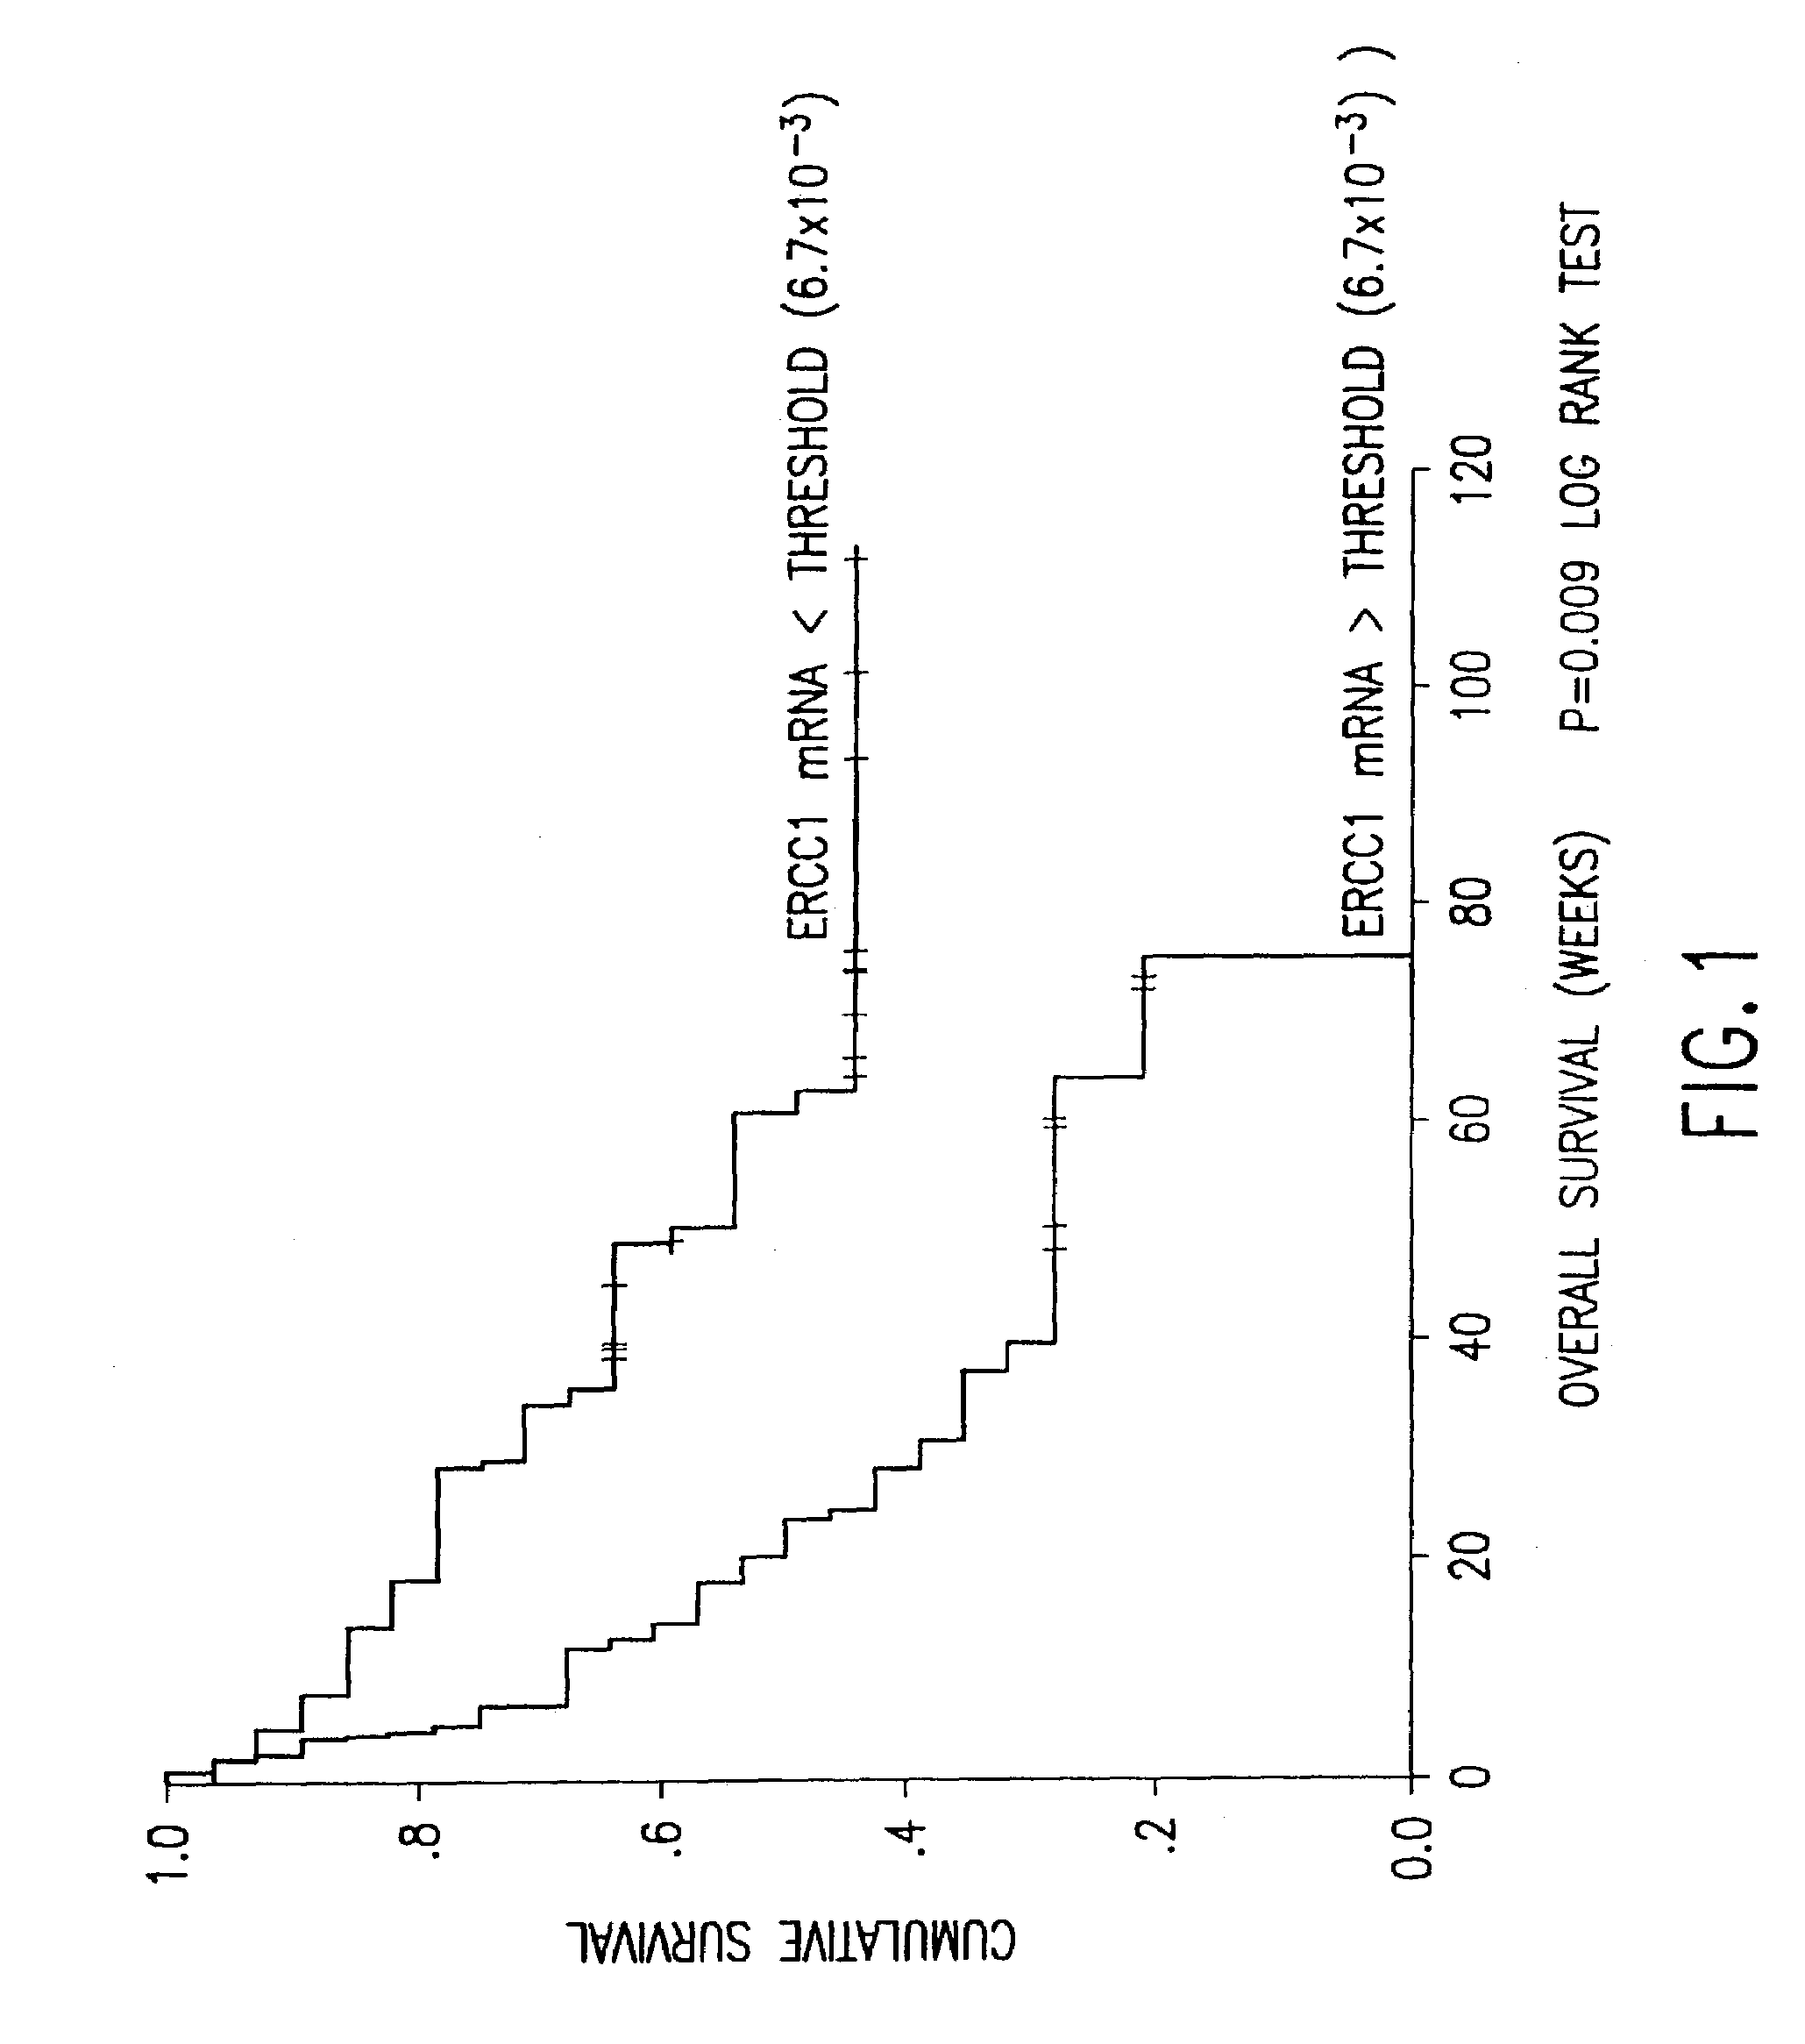 Method of determining a chemotherapeutic regimen based on ERCC1 expression